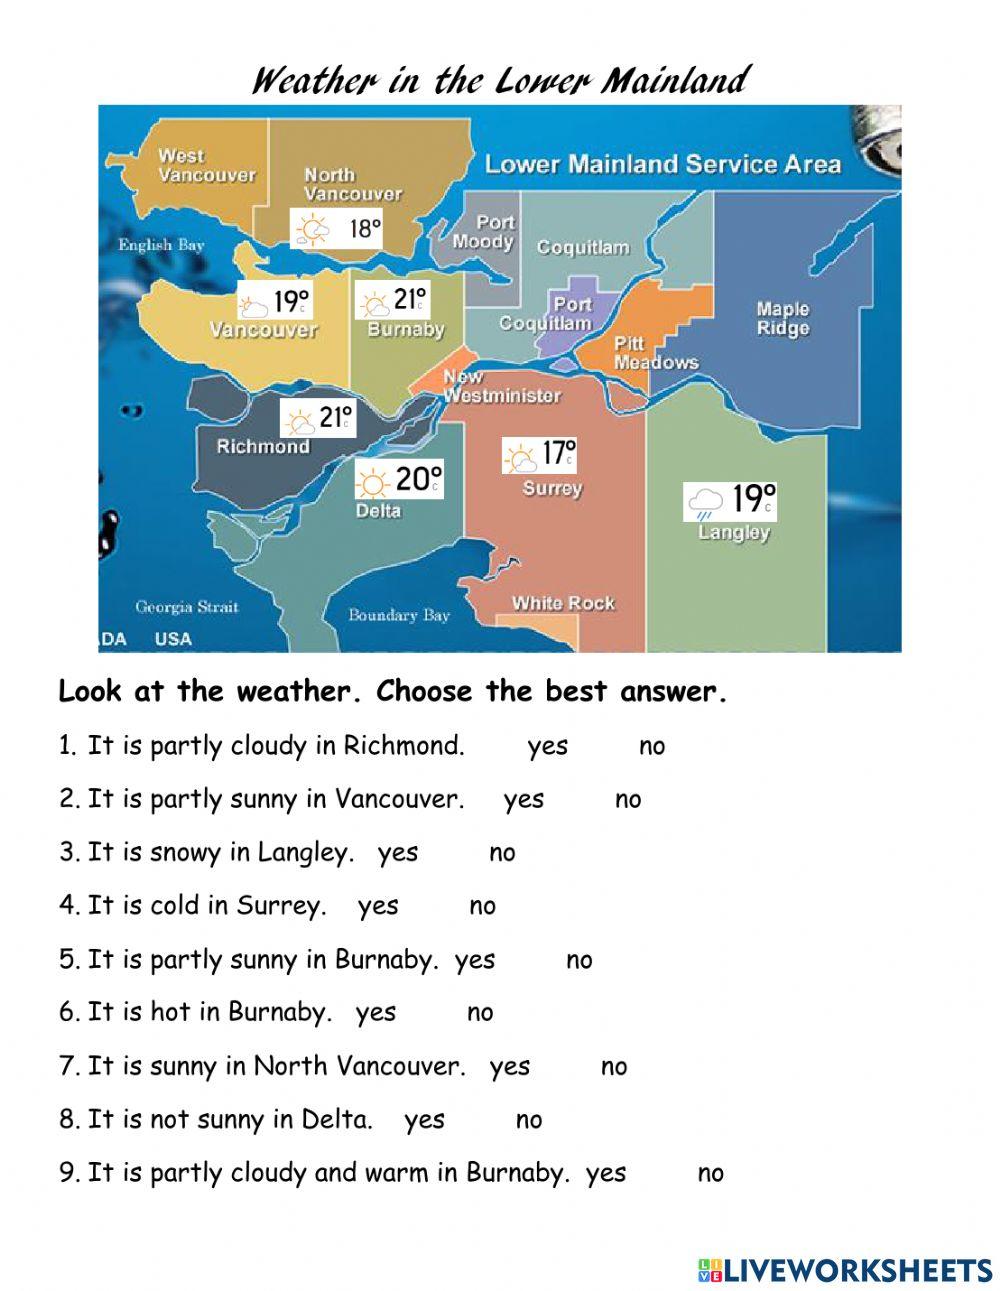 Weather and Lower Mainland